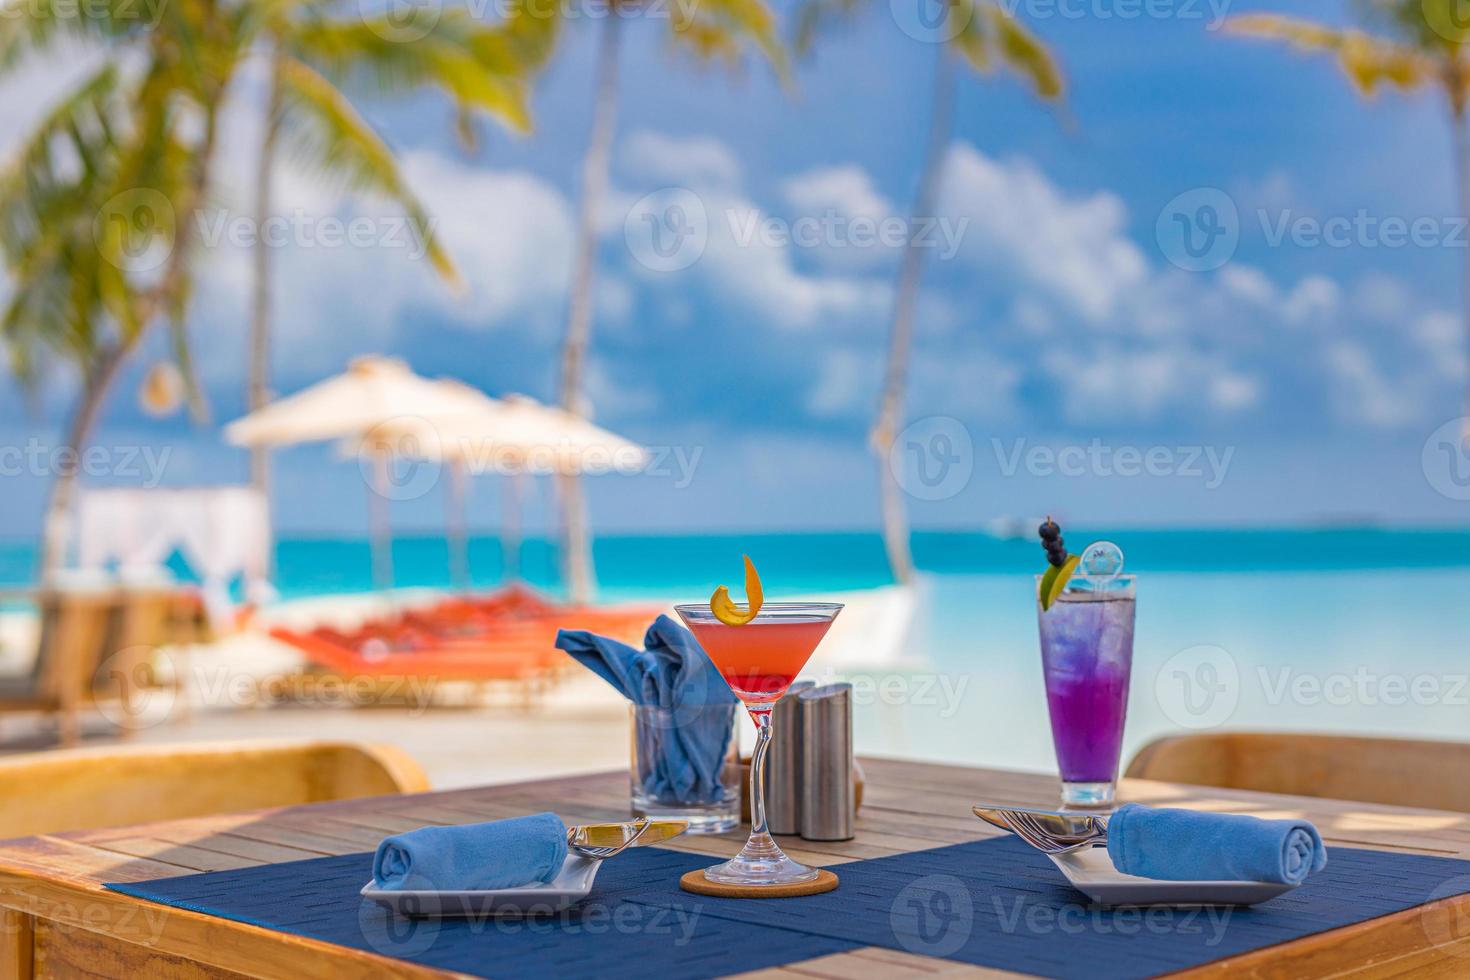 Luxury resort hotel poolside, outdoor restaurant on the beach, ocean and sky, tropical island cafe, tables, food. Summer vacation or holiday, family travel. Palm trees, infinity pool, cocktails, relax photo